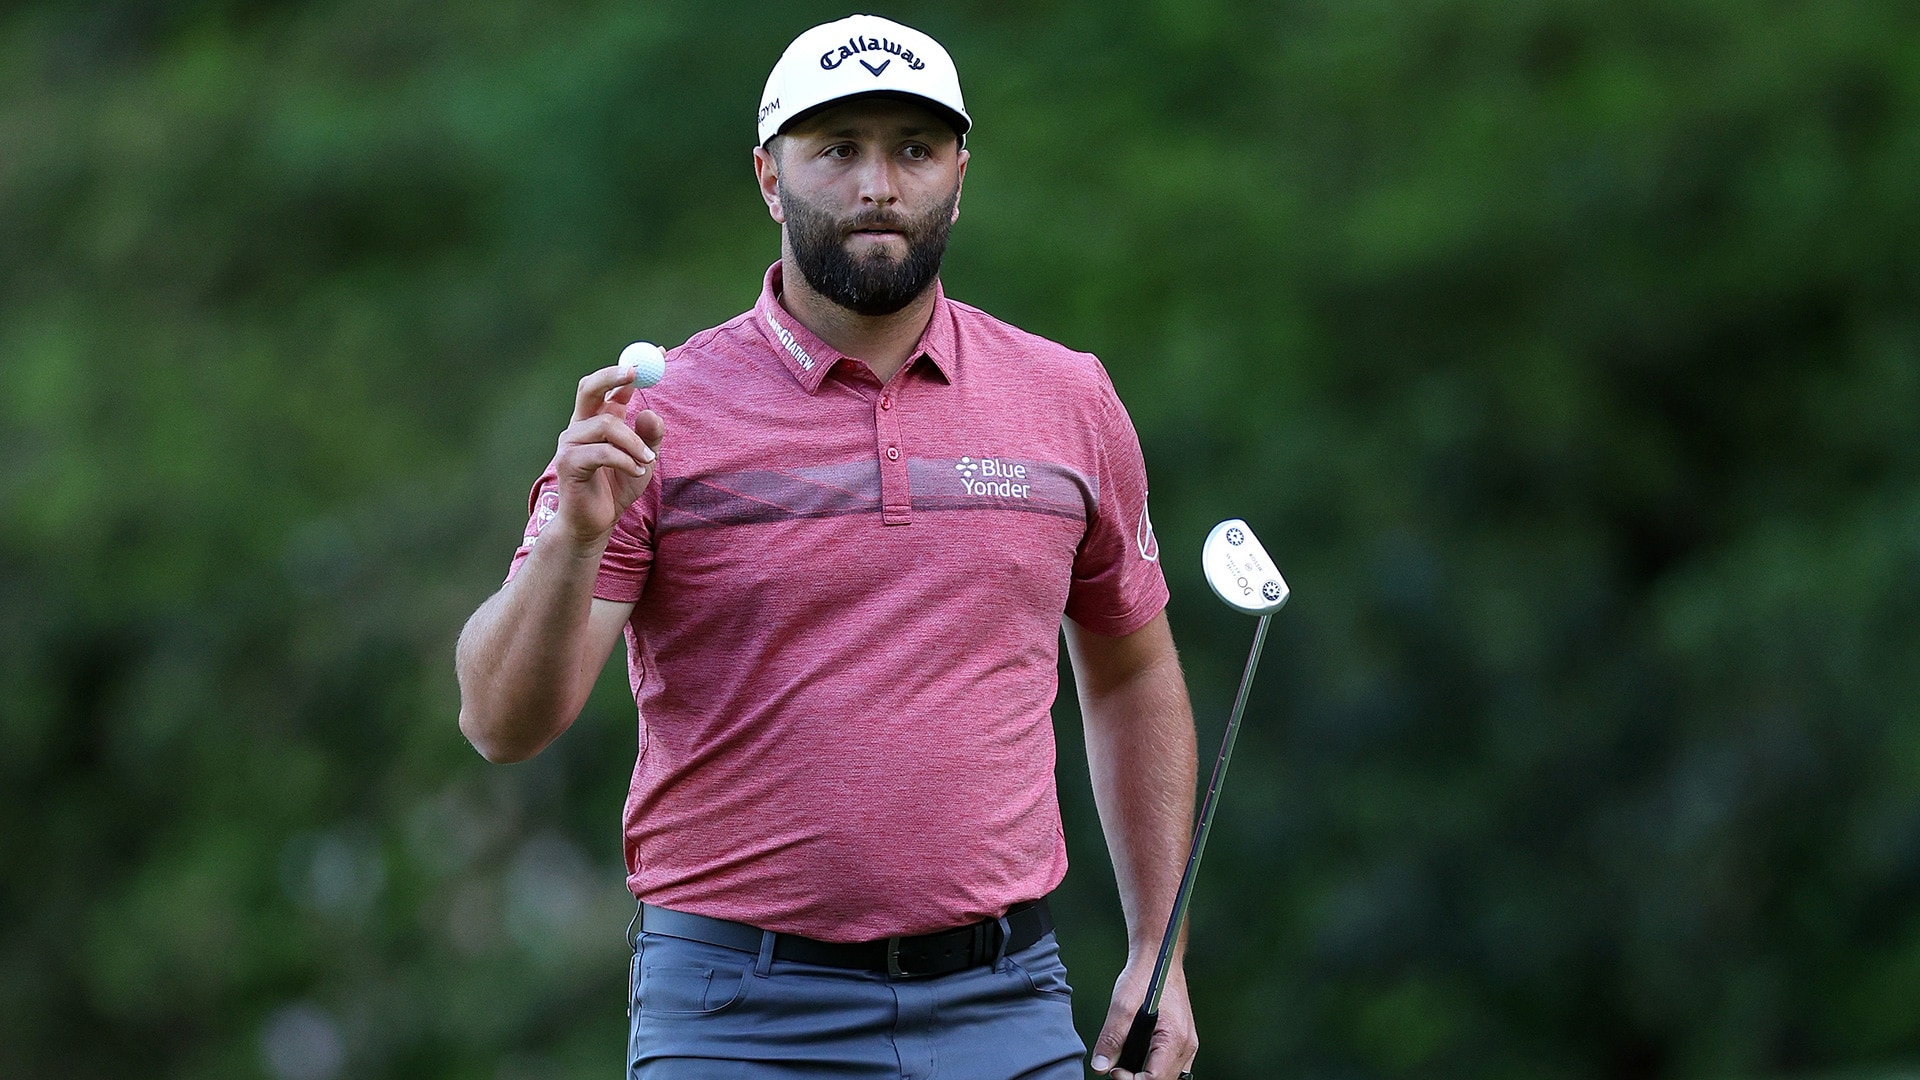 Mexico Open field: Jon Rahm to defend; 9 total top-100 players